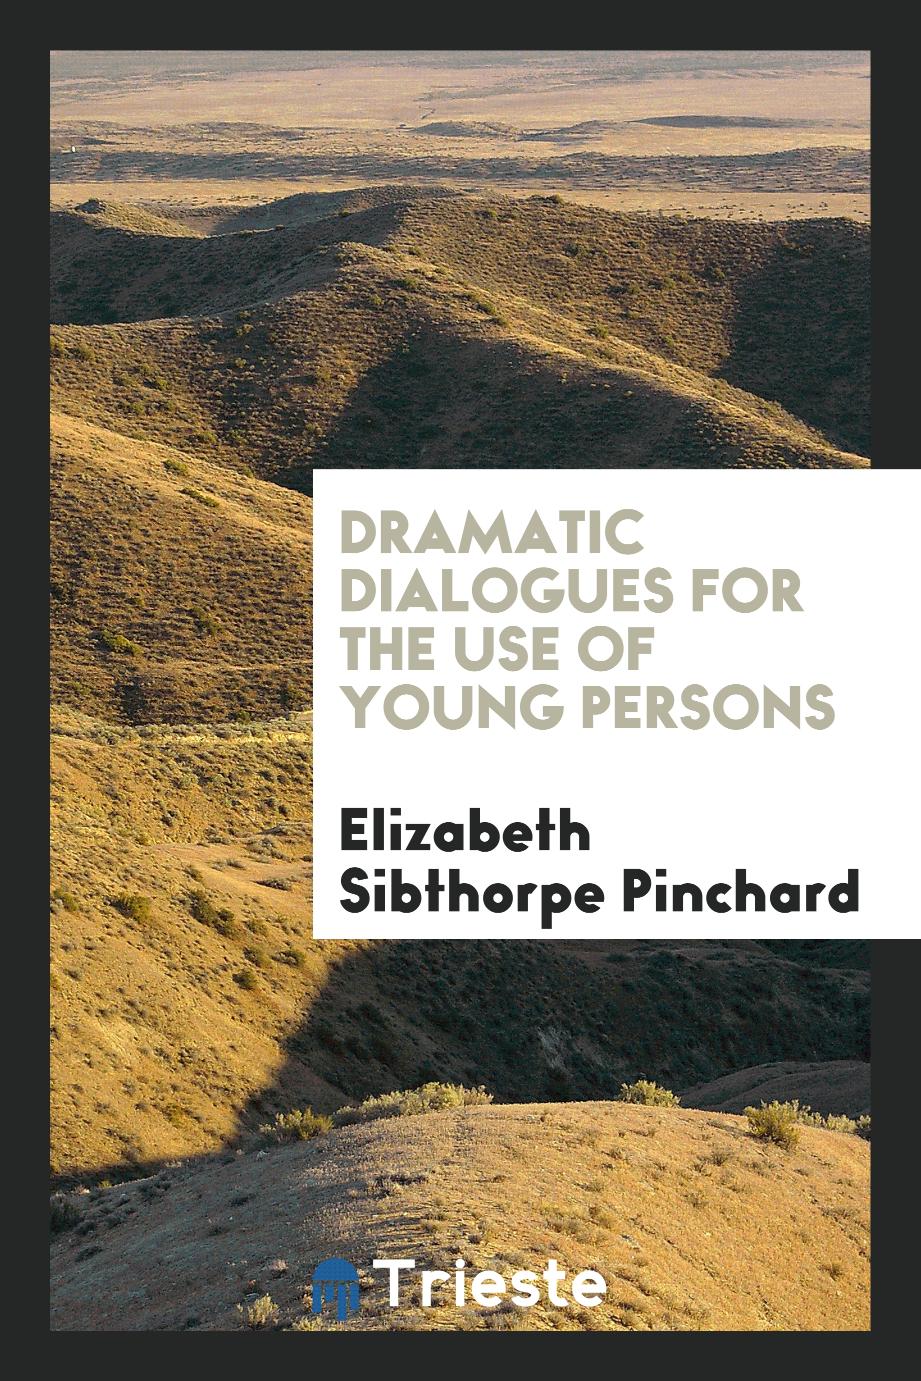 Dramatic dialogues for the use of young persons